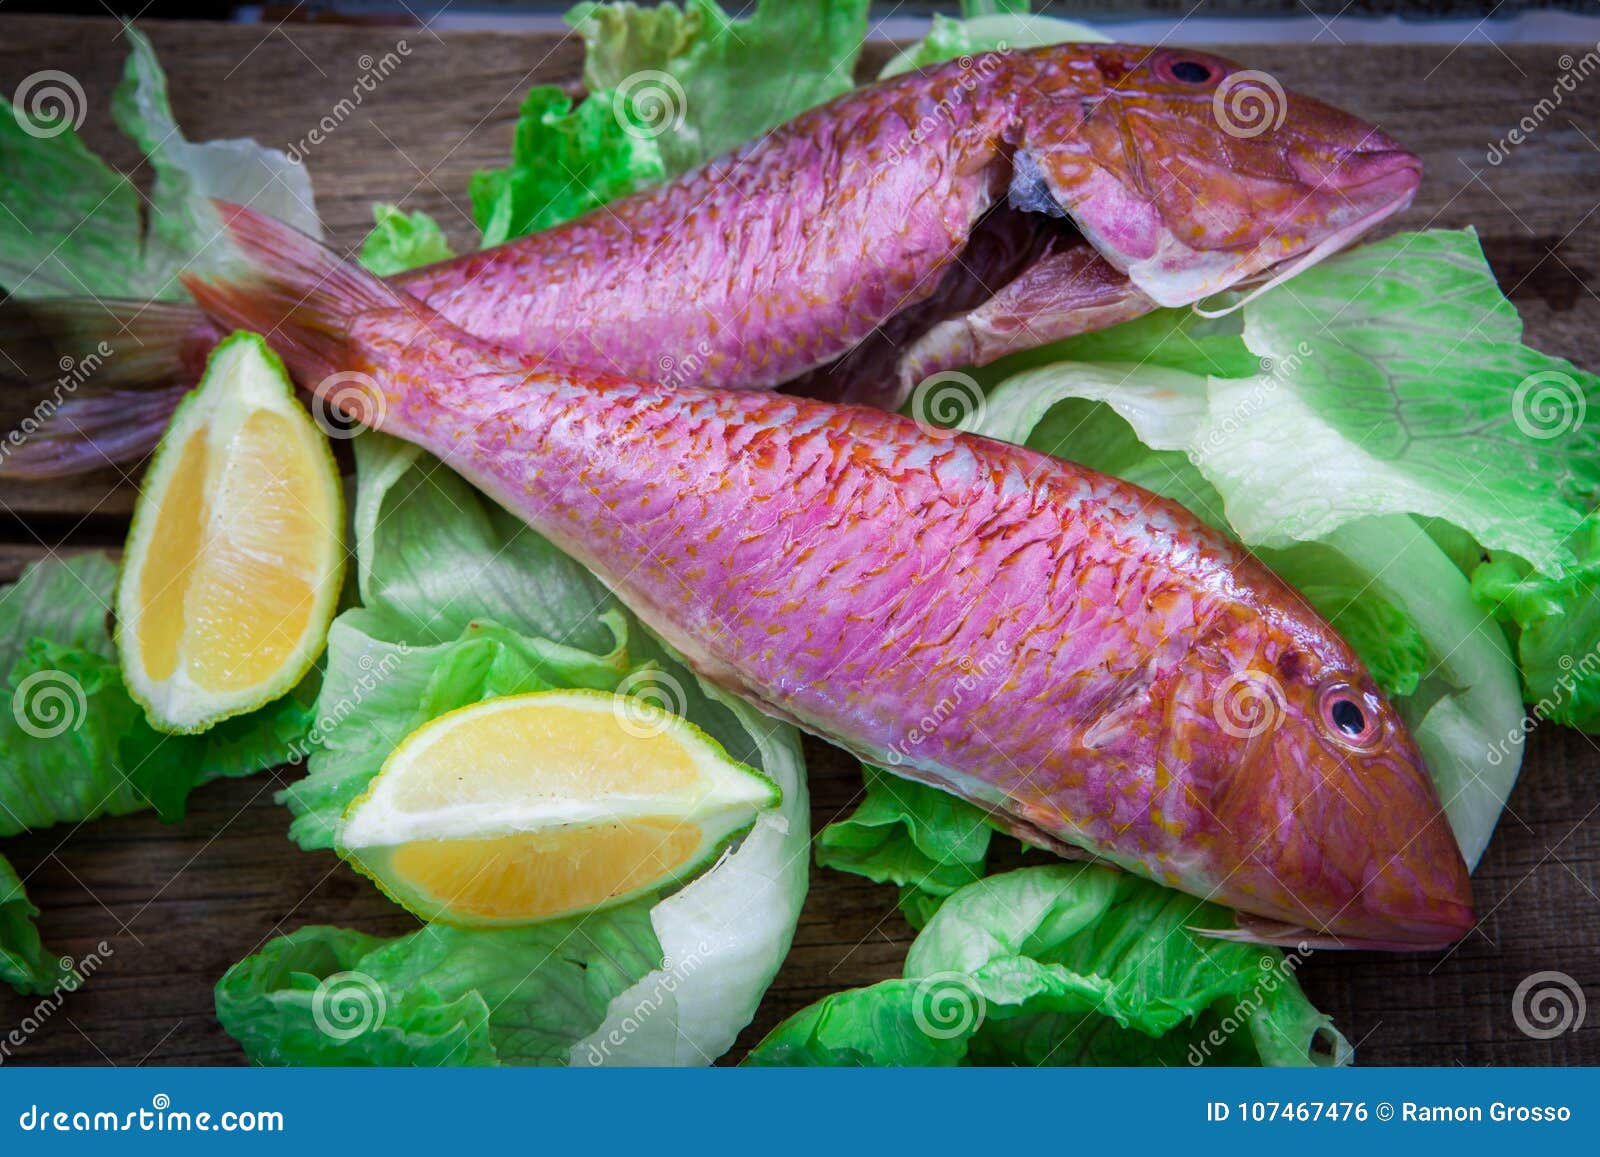 Red mullet fish style stock photo. Image of health